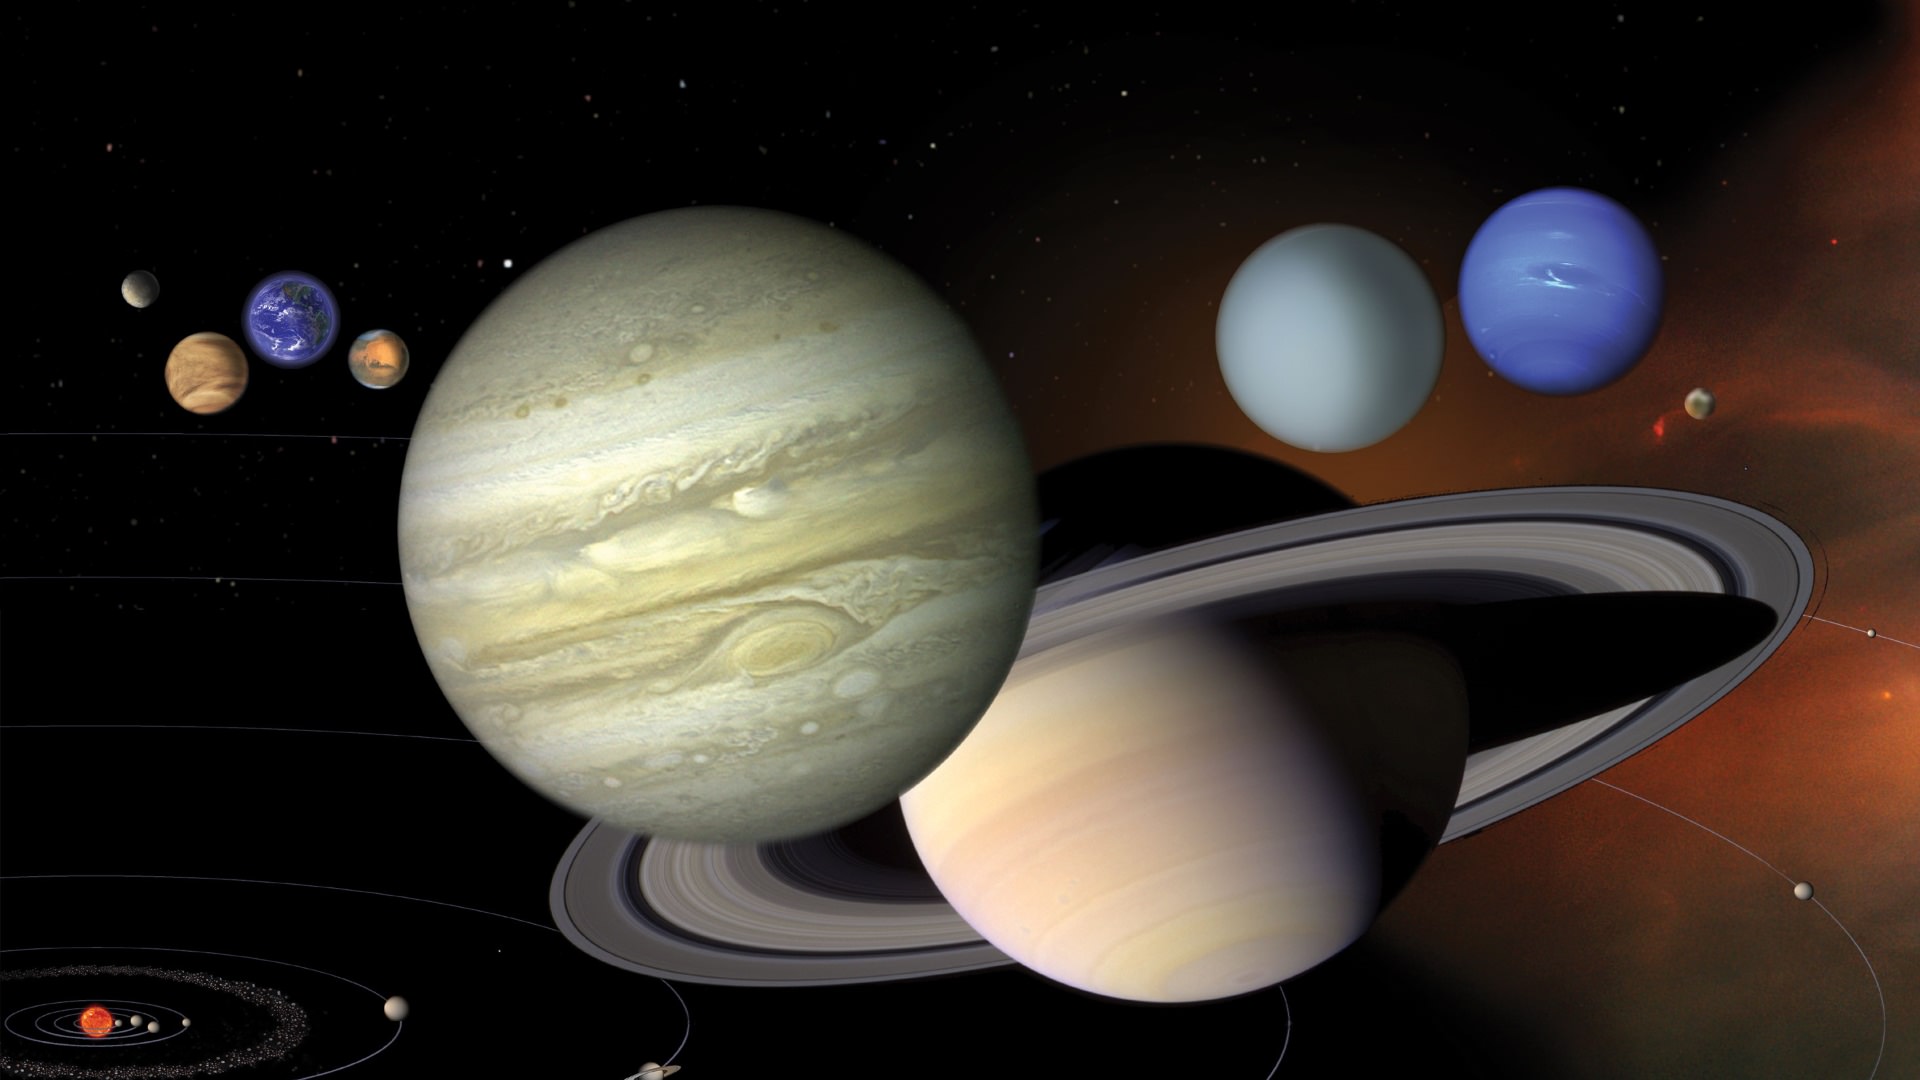 different solar systems universe